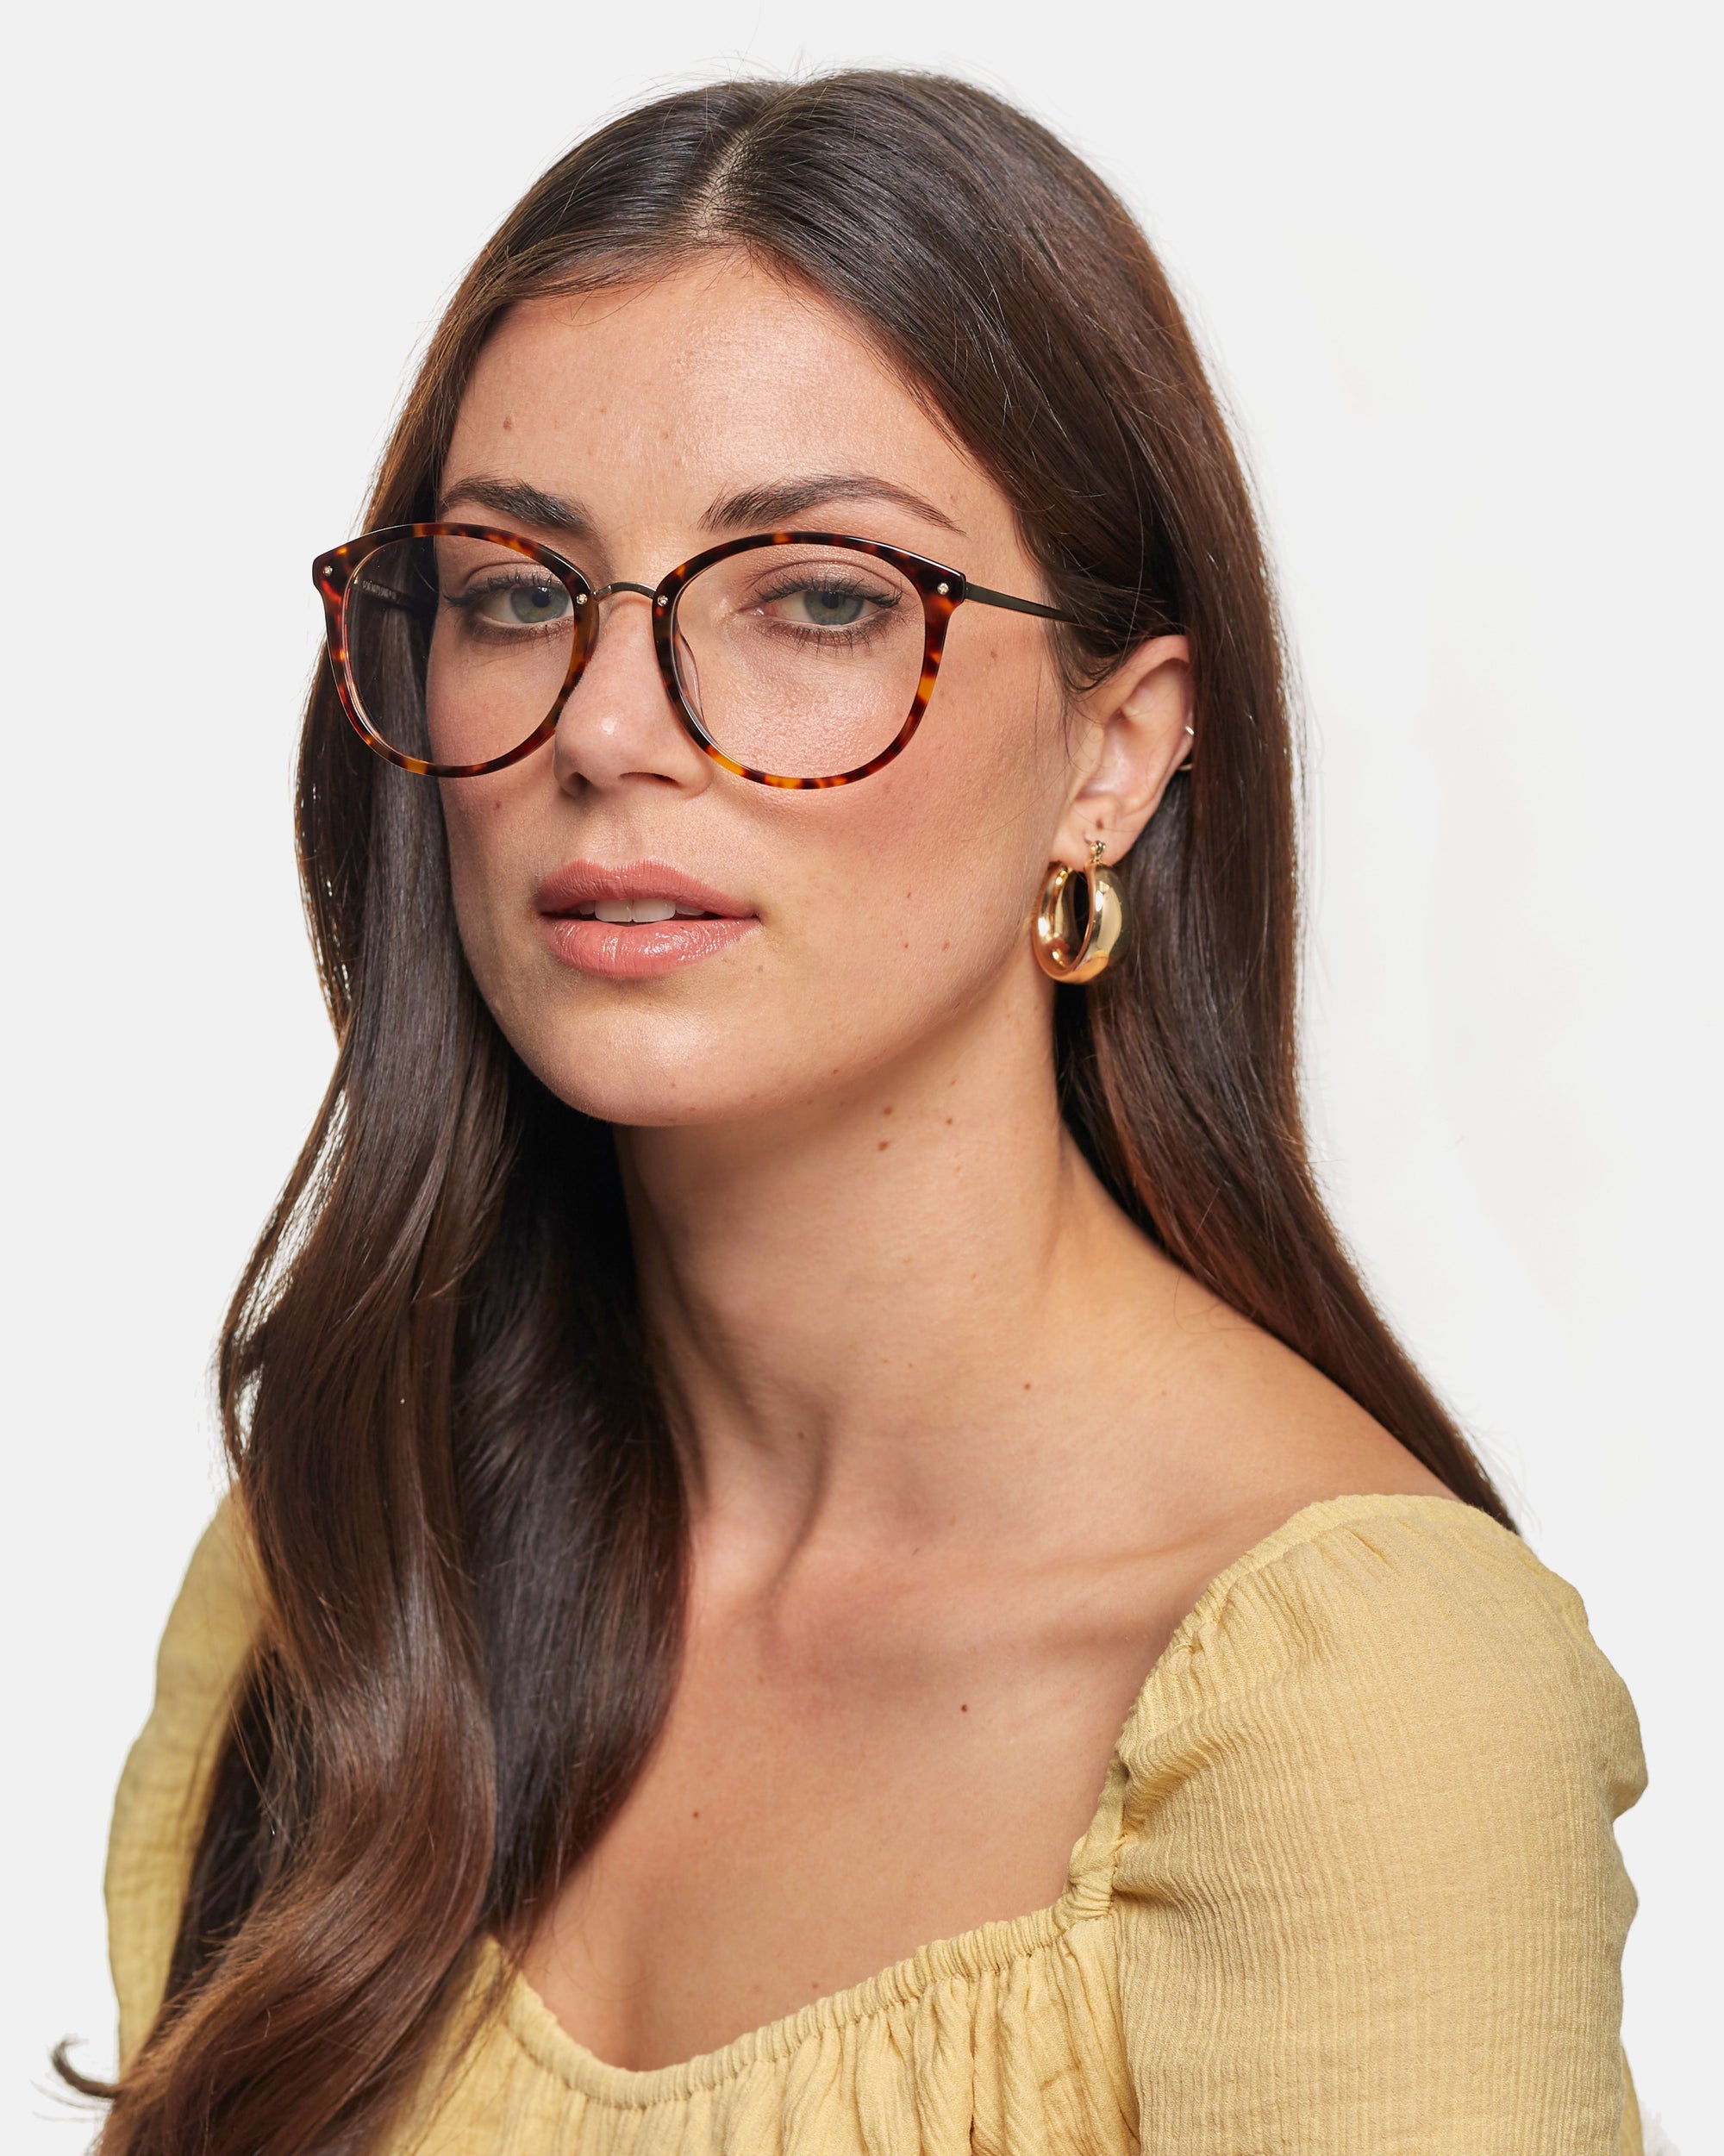 A person with long, brown hair wearing rectangular, tortoiseshell For Art's Sake® Club eyeglasses with a blue light filter and gold hoop earrings. They have on an off-the-shoulder, yellow blouse and are looking slightly to the side against a plain background.